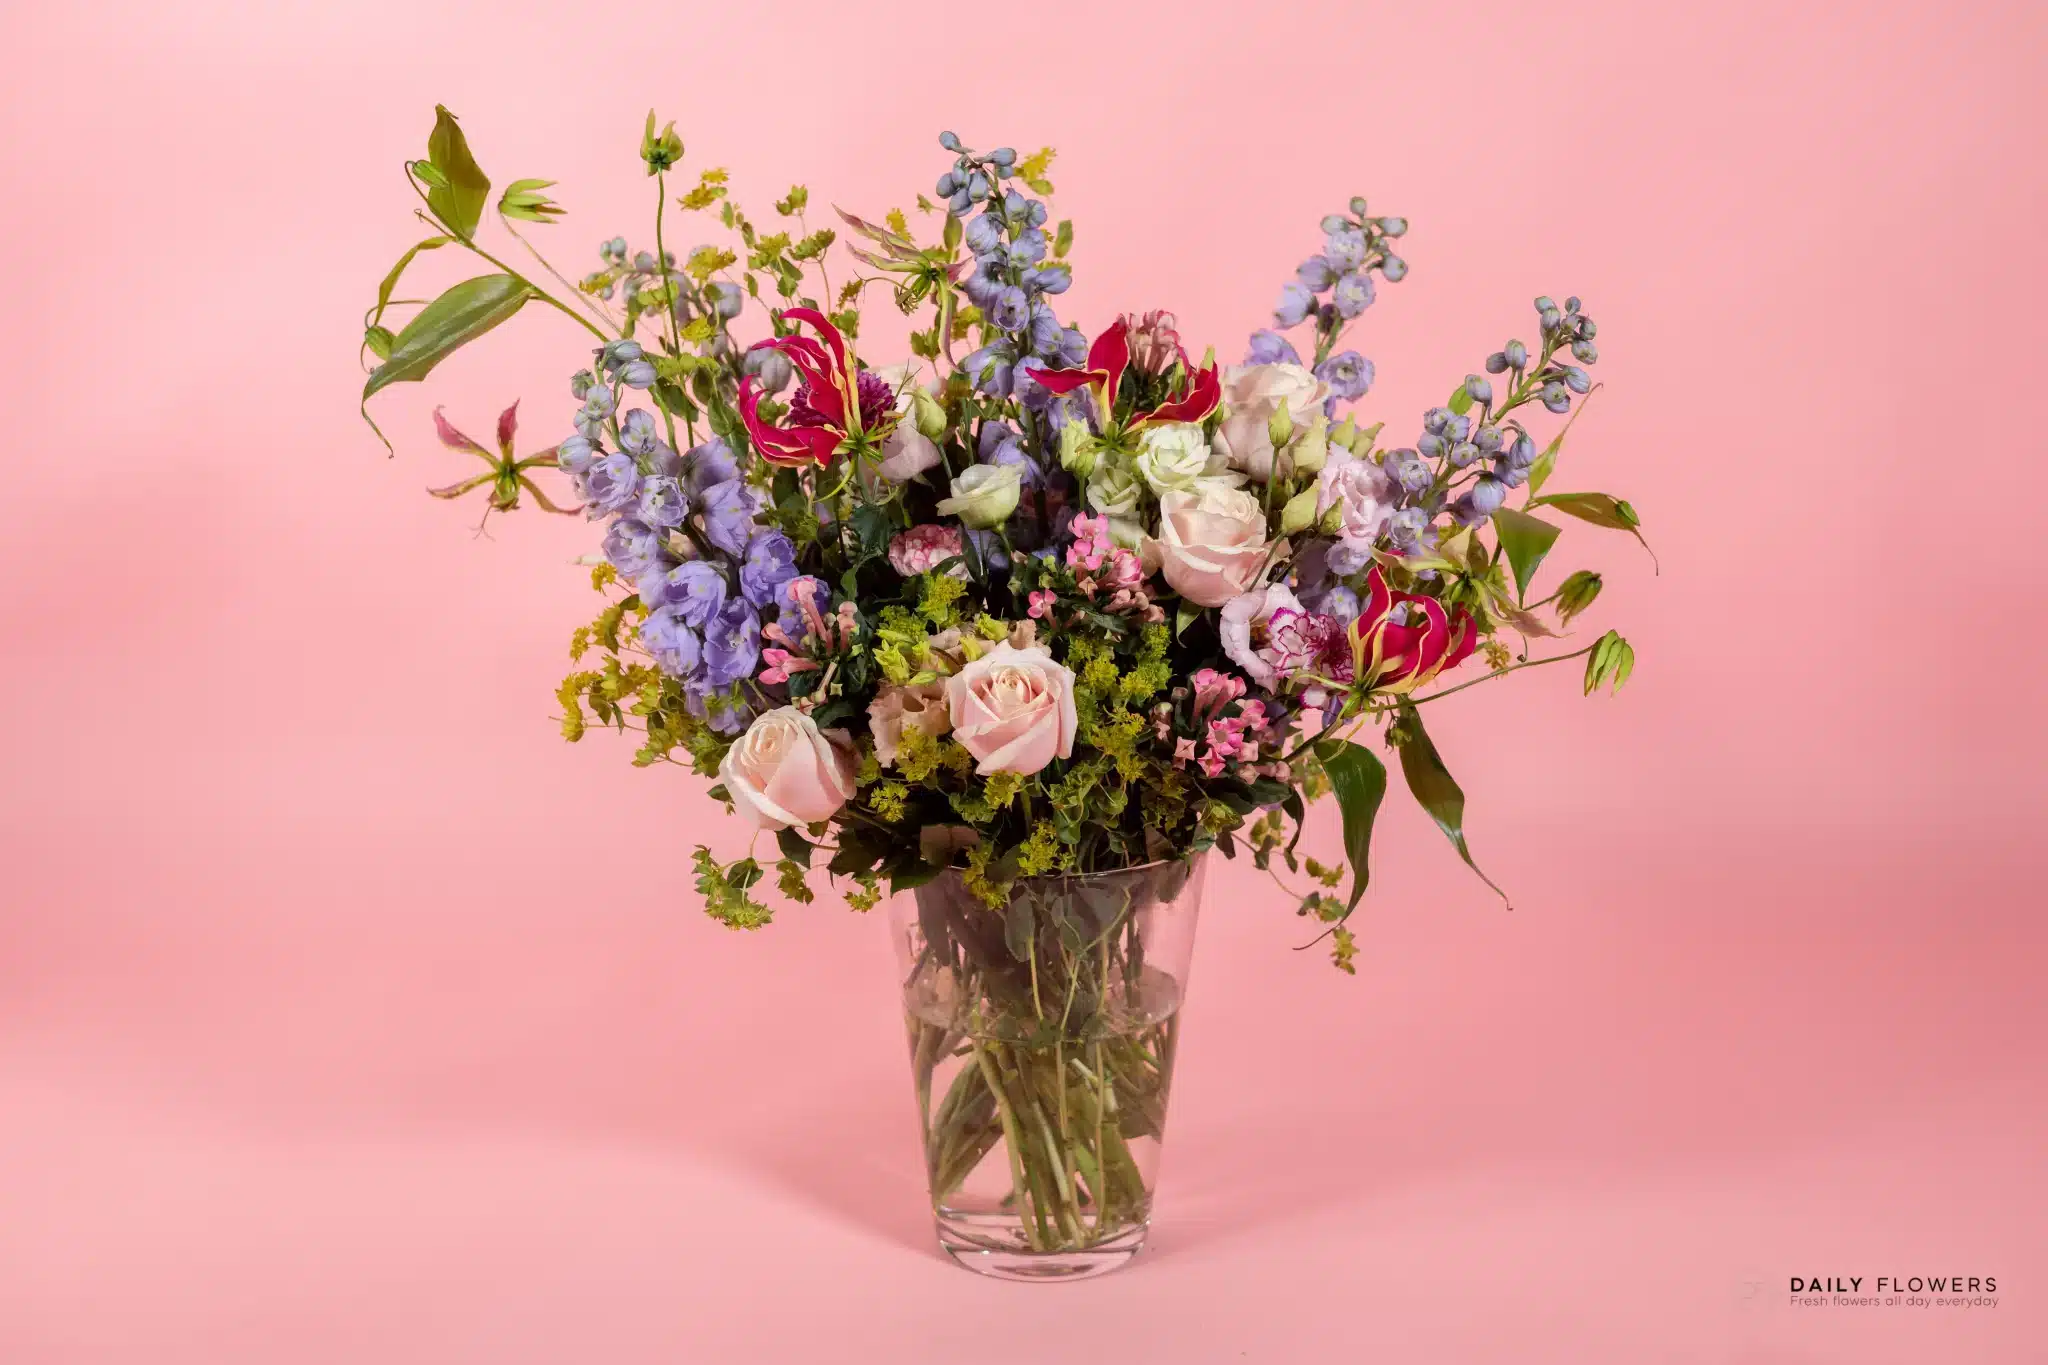 Daily Flowers exclusive